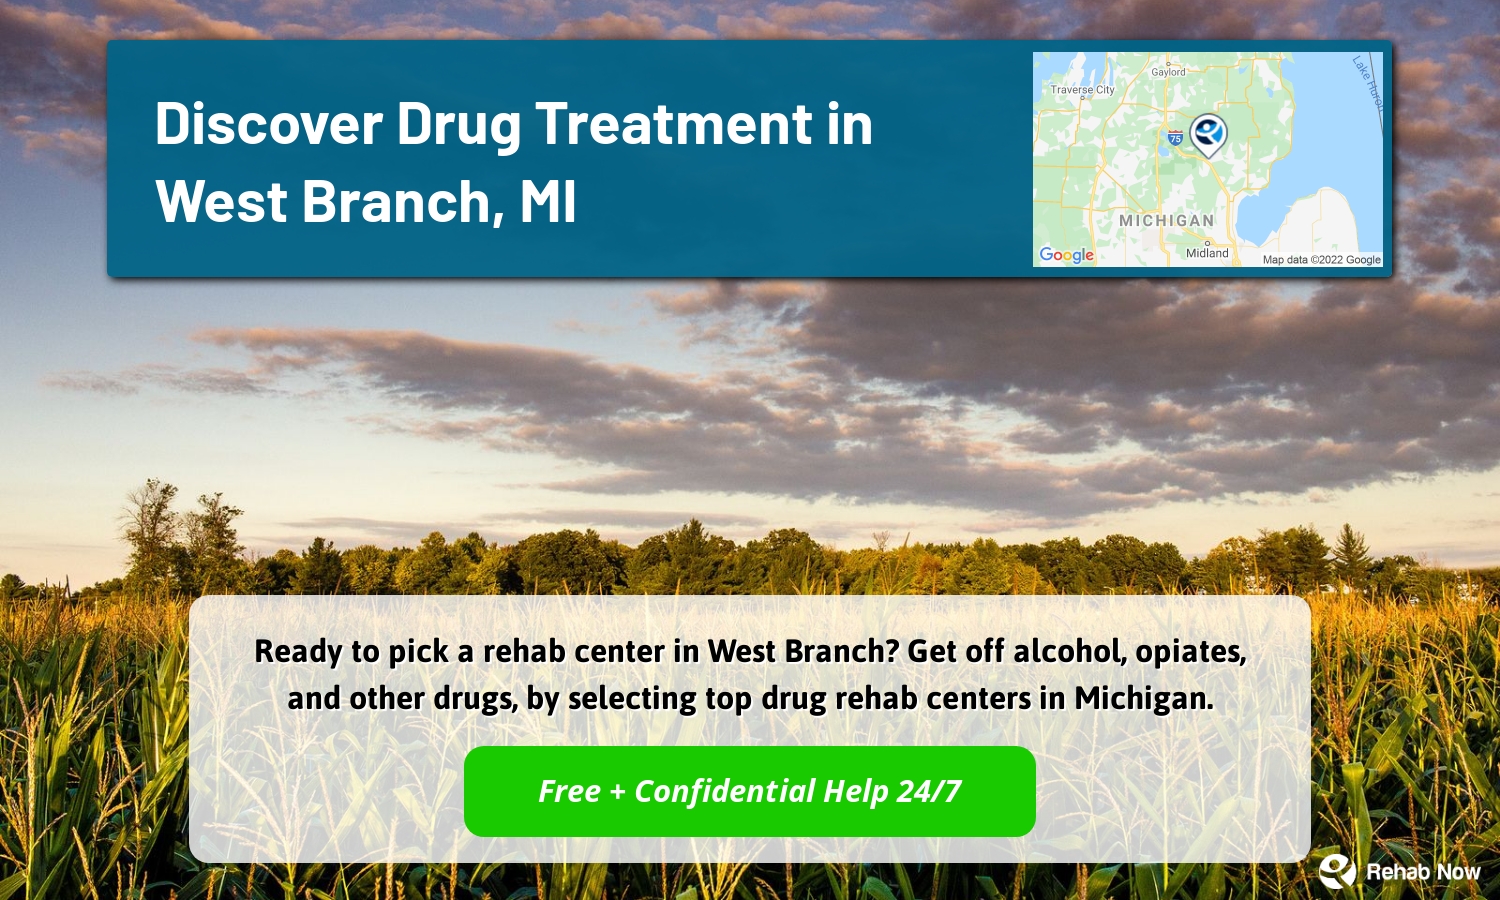 Ready to pick a rehab center in West Branch? Get off alcohol, opiates, and other drugs, by selecting top drug rehab centers in Michigan.